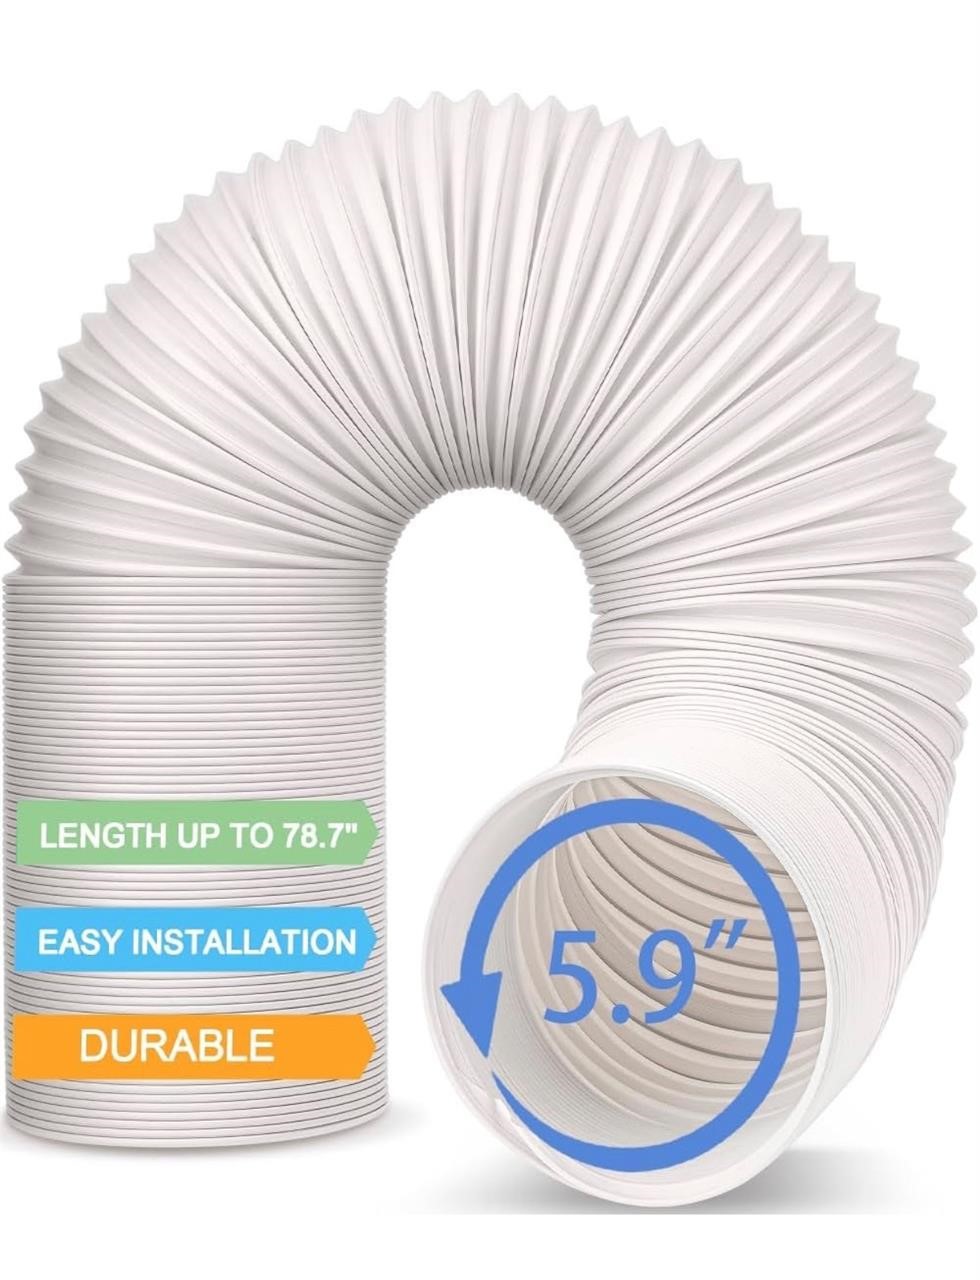 NEW $250 12-Pack (78.7") Air Conditioner Hose